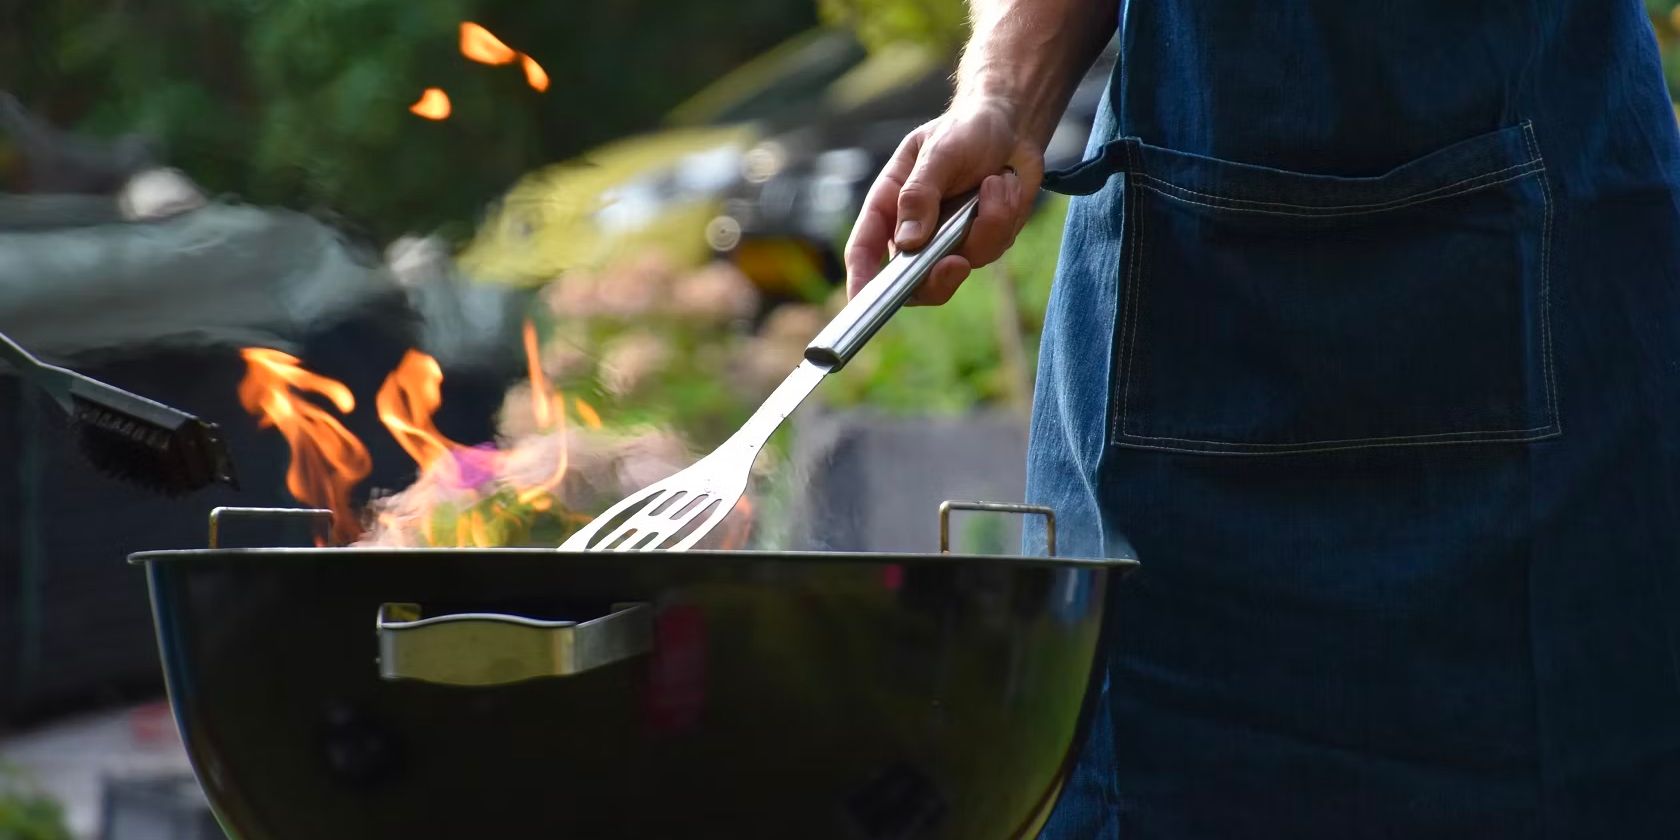 Man using tongs on barbecue